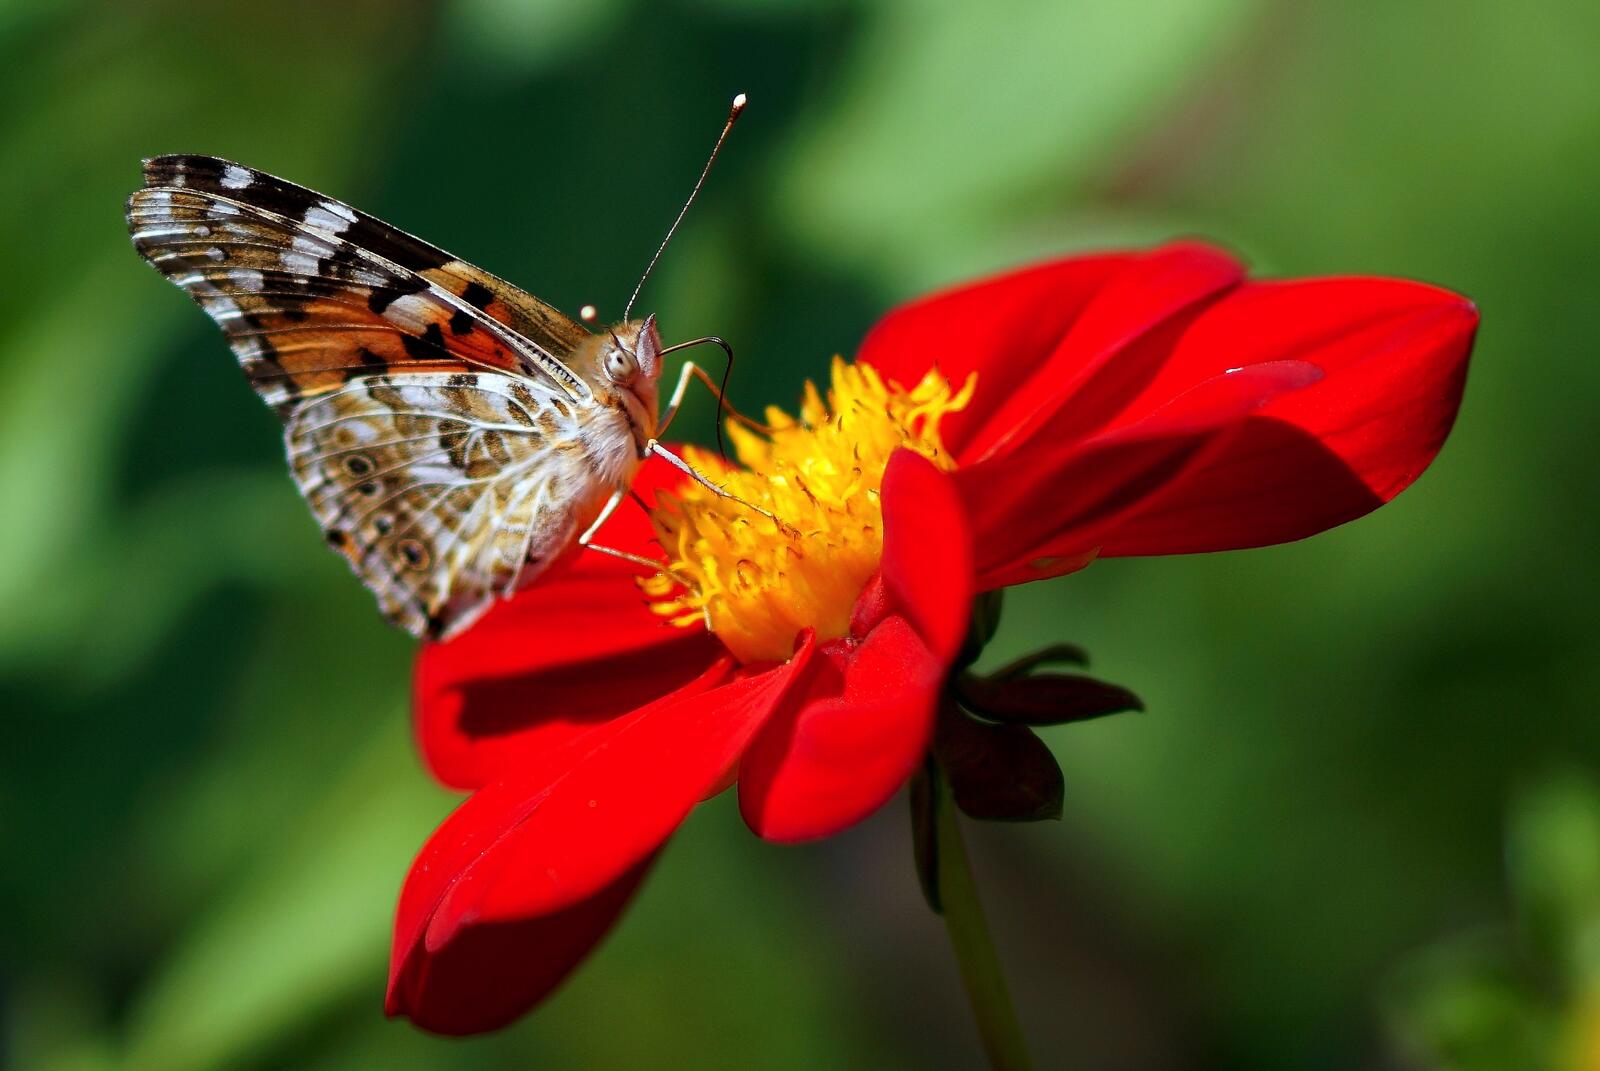 Wallpapers wallpaper butterfly insects red dahlia flower on the desktop